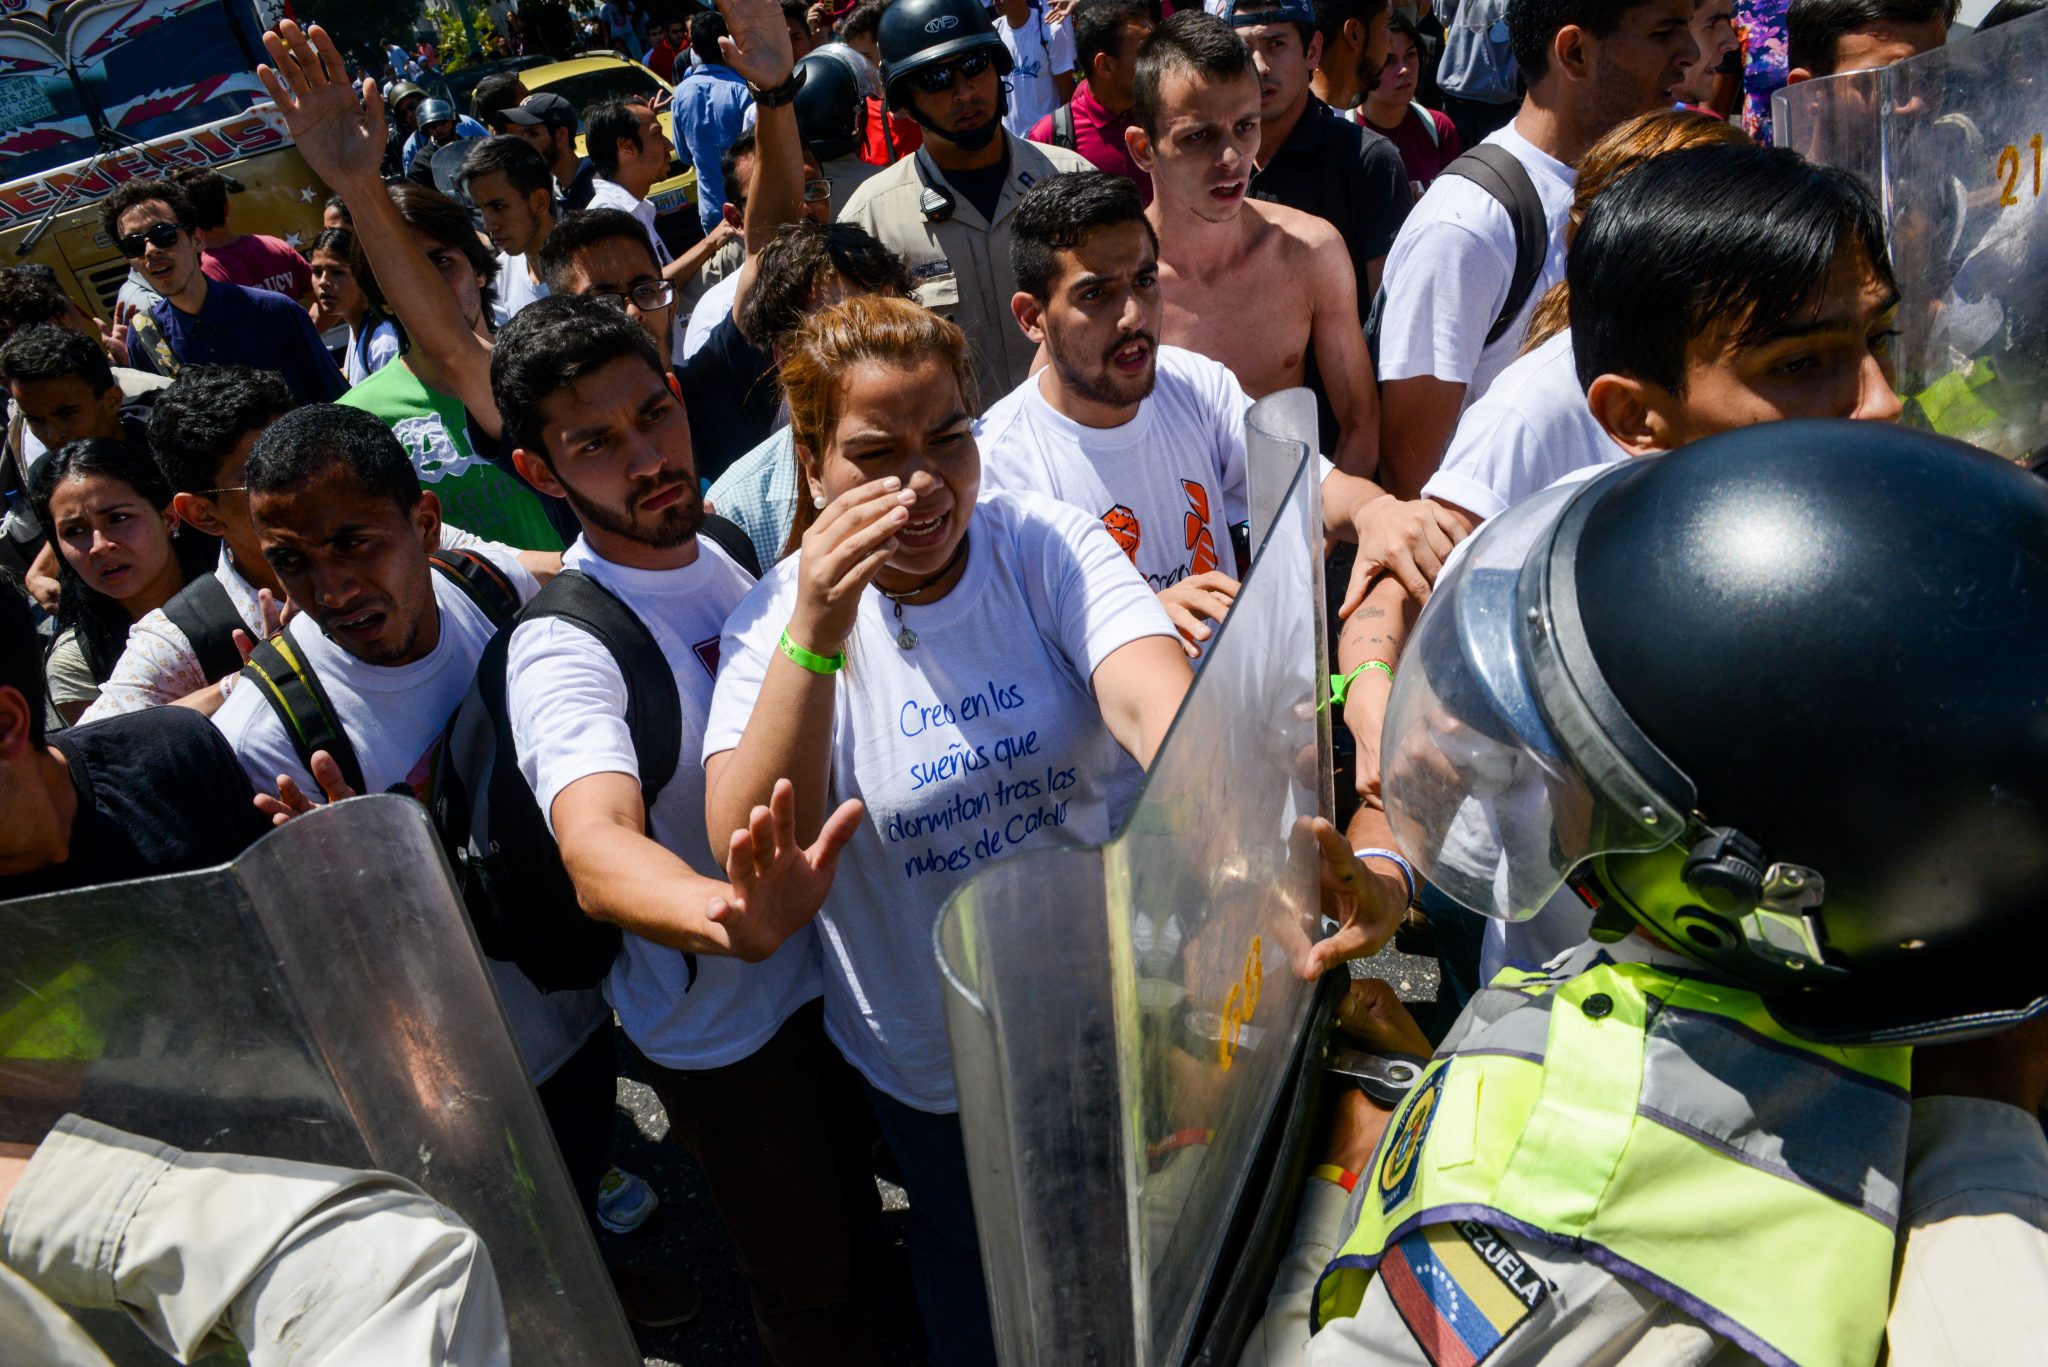 University students confront police officers blocking the way of a march demanding early elections to oust Venezuelan President Nicolas Maduro over the country's economic and political crisis, in front of the Central University of Venezuela (UCV) in Caracas on February 15, 2017. The next scheduled general election is in late 2018, with Maduro's current term expiring in early 2019. Recent polls indicate 80 percent of Venezuelans disapprove of him.  / AFP PHOTO / Federico PARRA